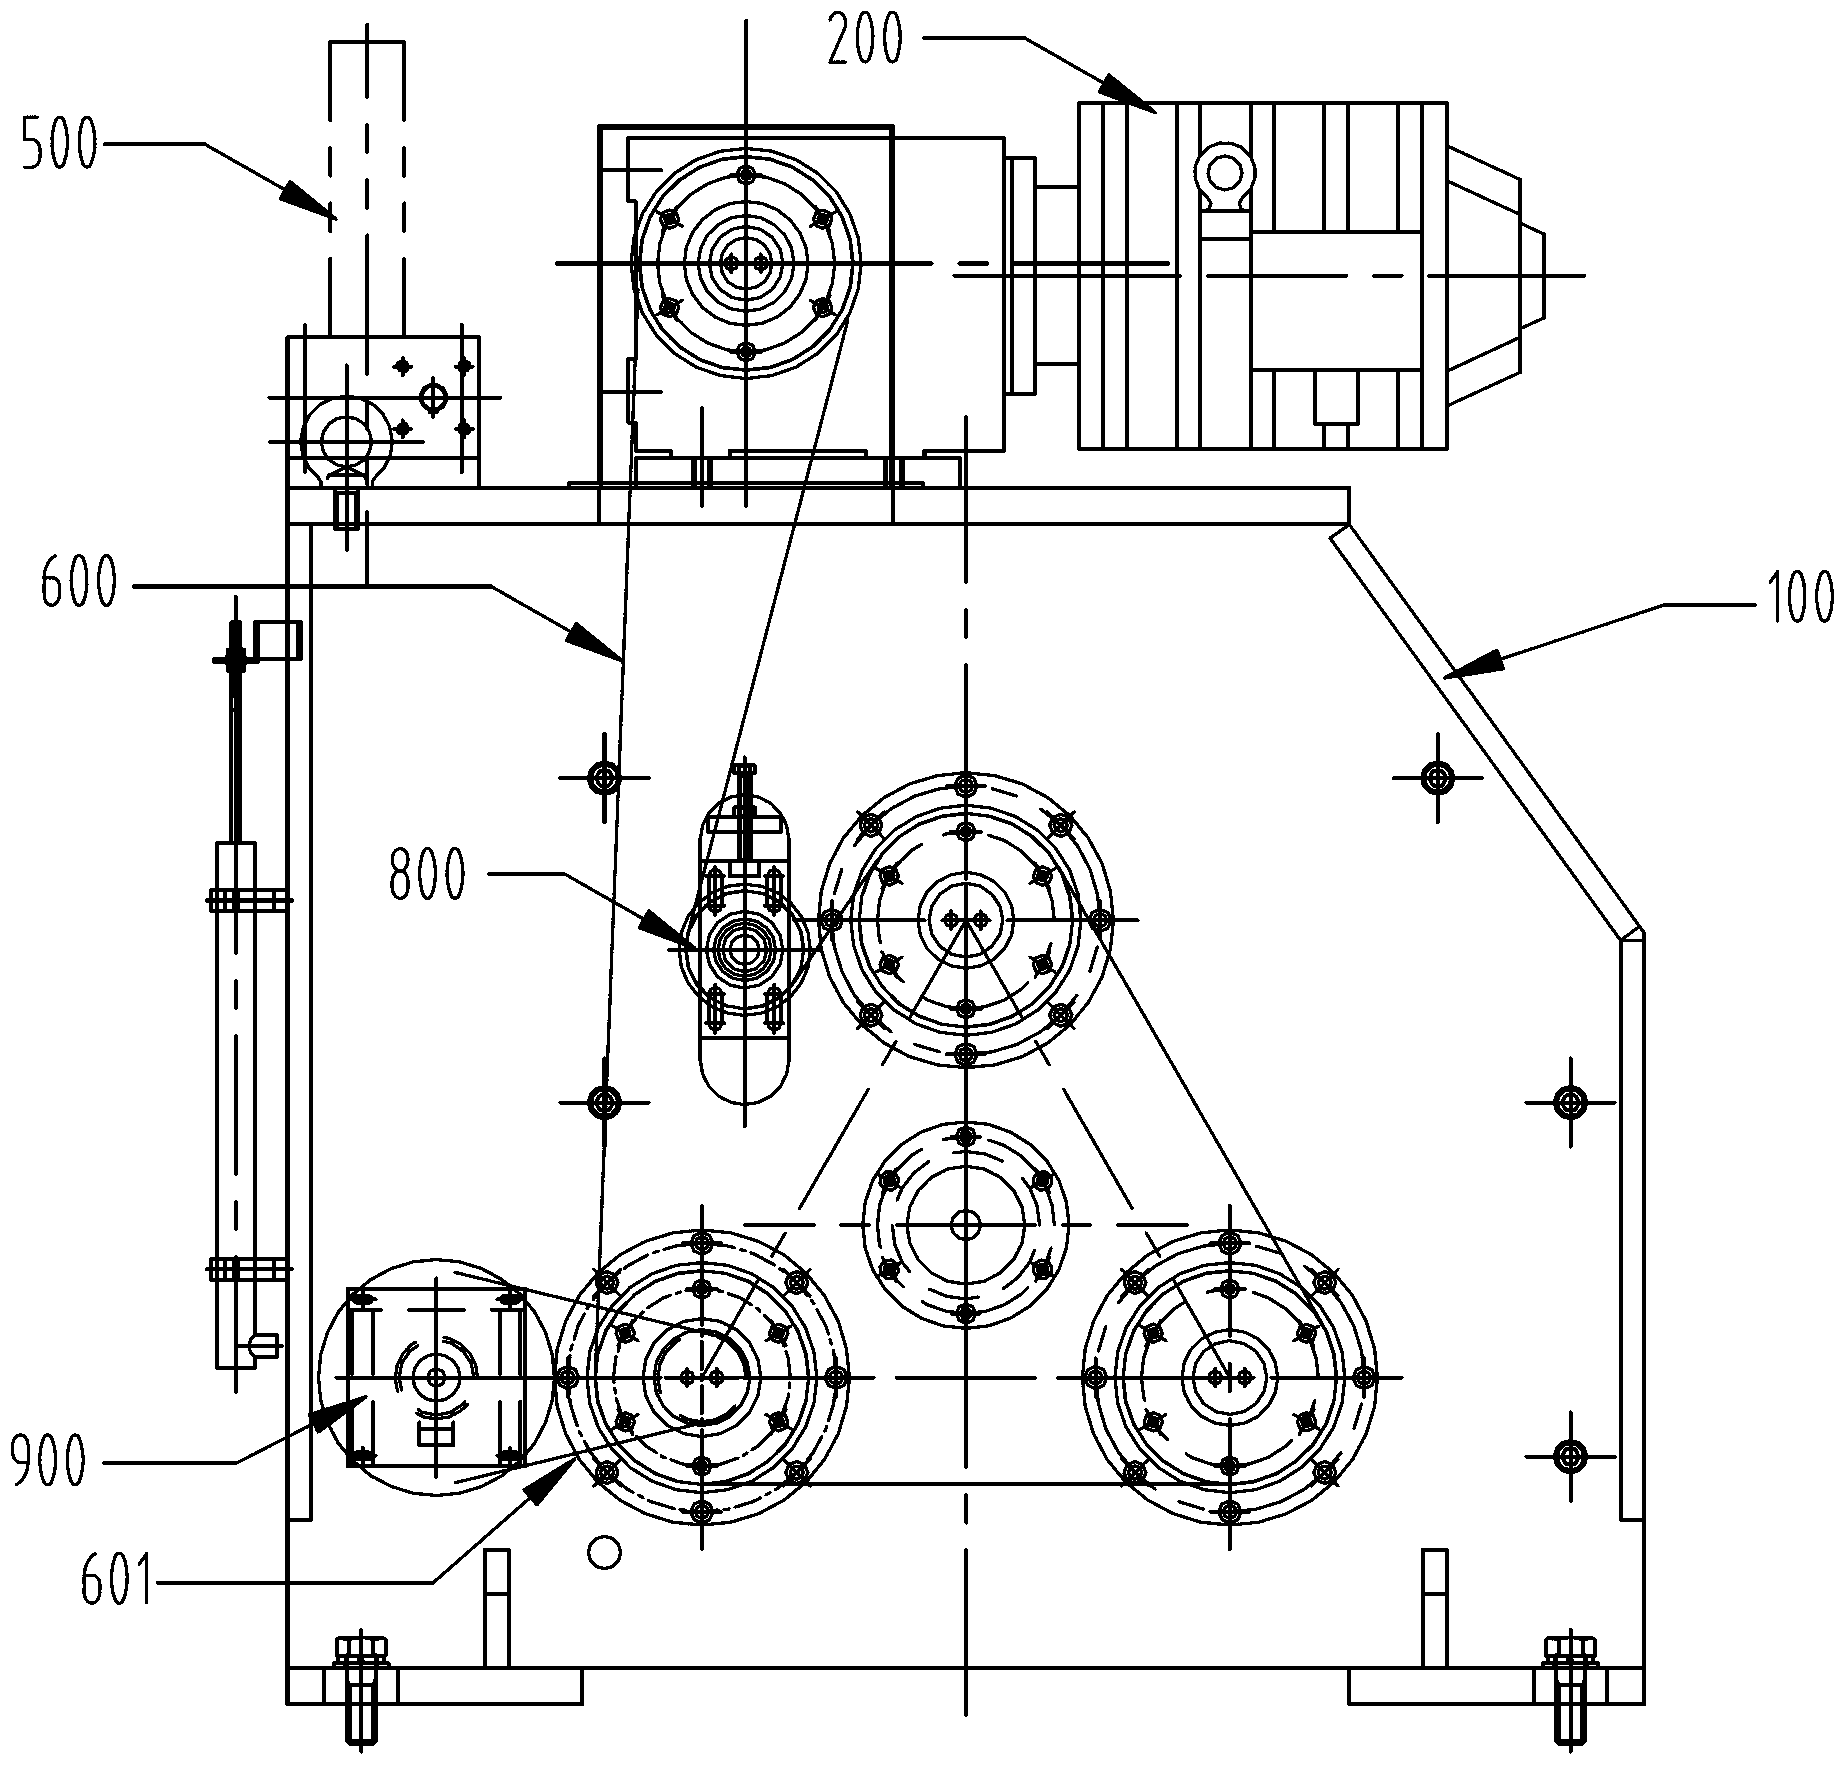 Automatic-opening-closing conveying mechanism with three rollers rotating automatically for cylinders